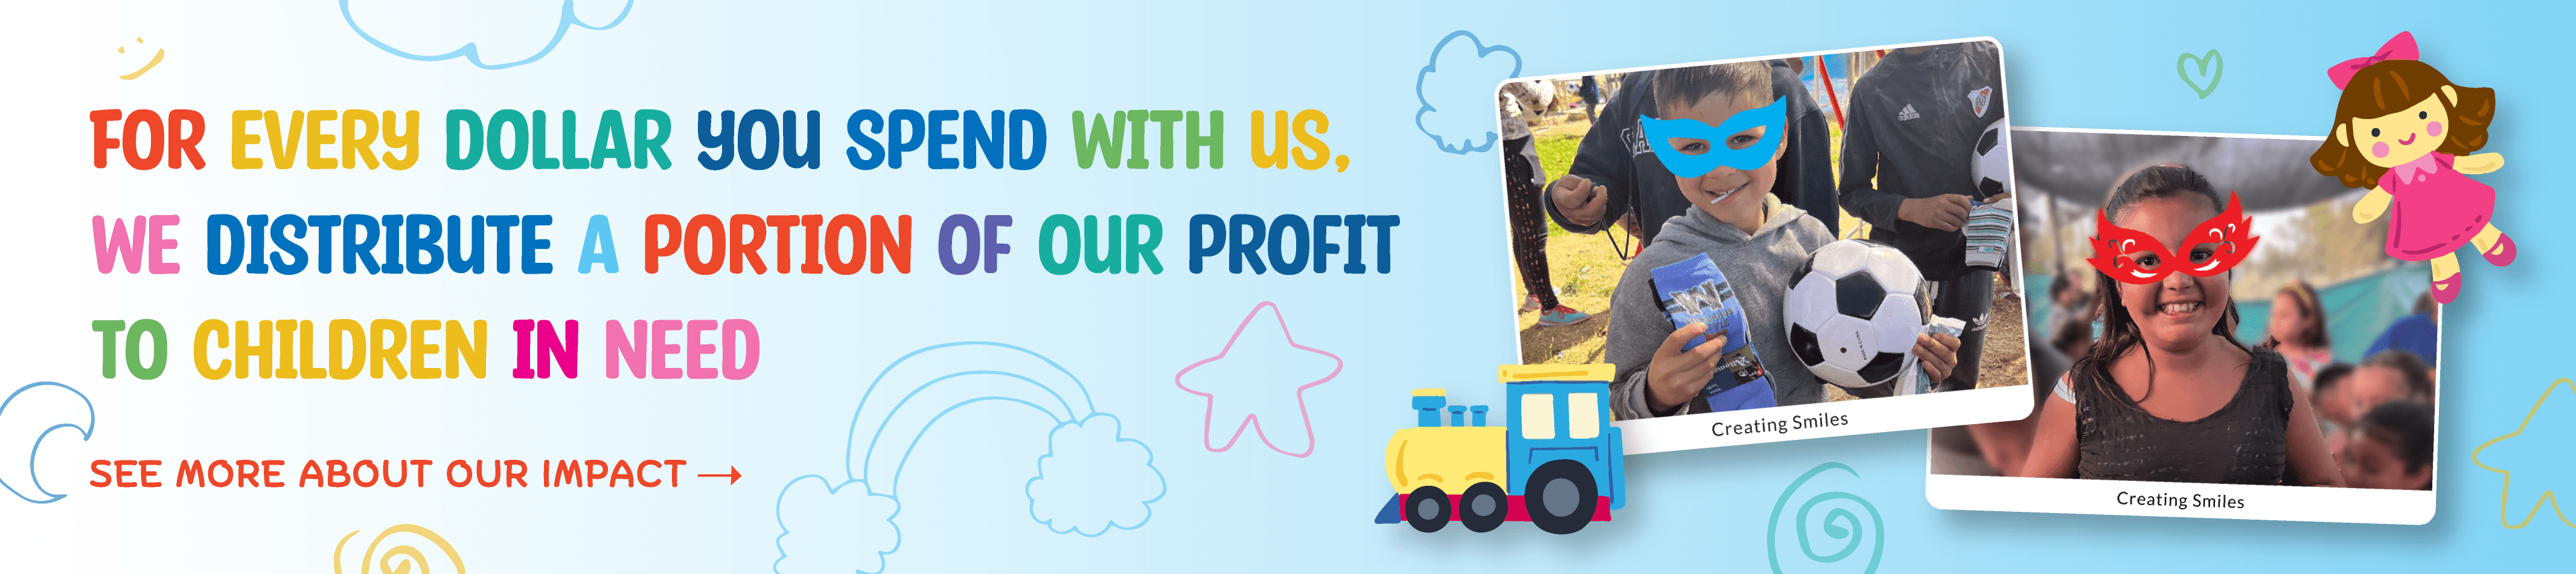 For every dollar you spend with us, we distribute a portion of our profit to children in need.